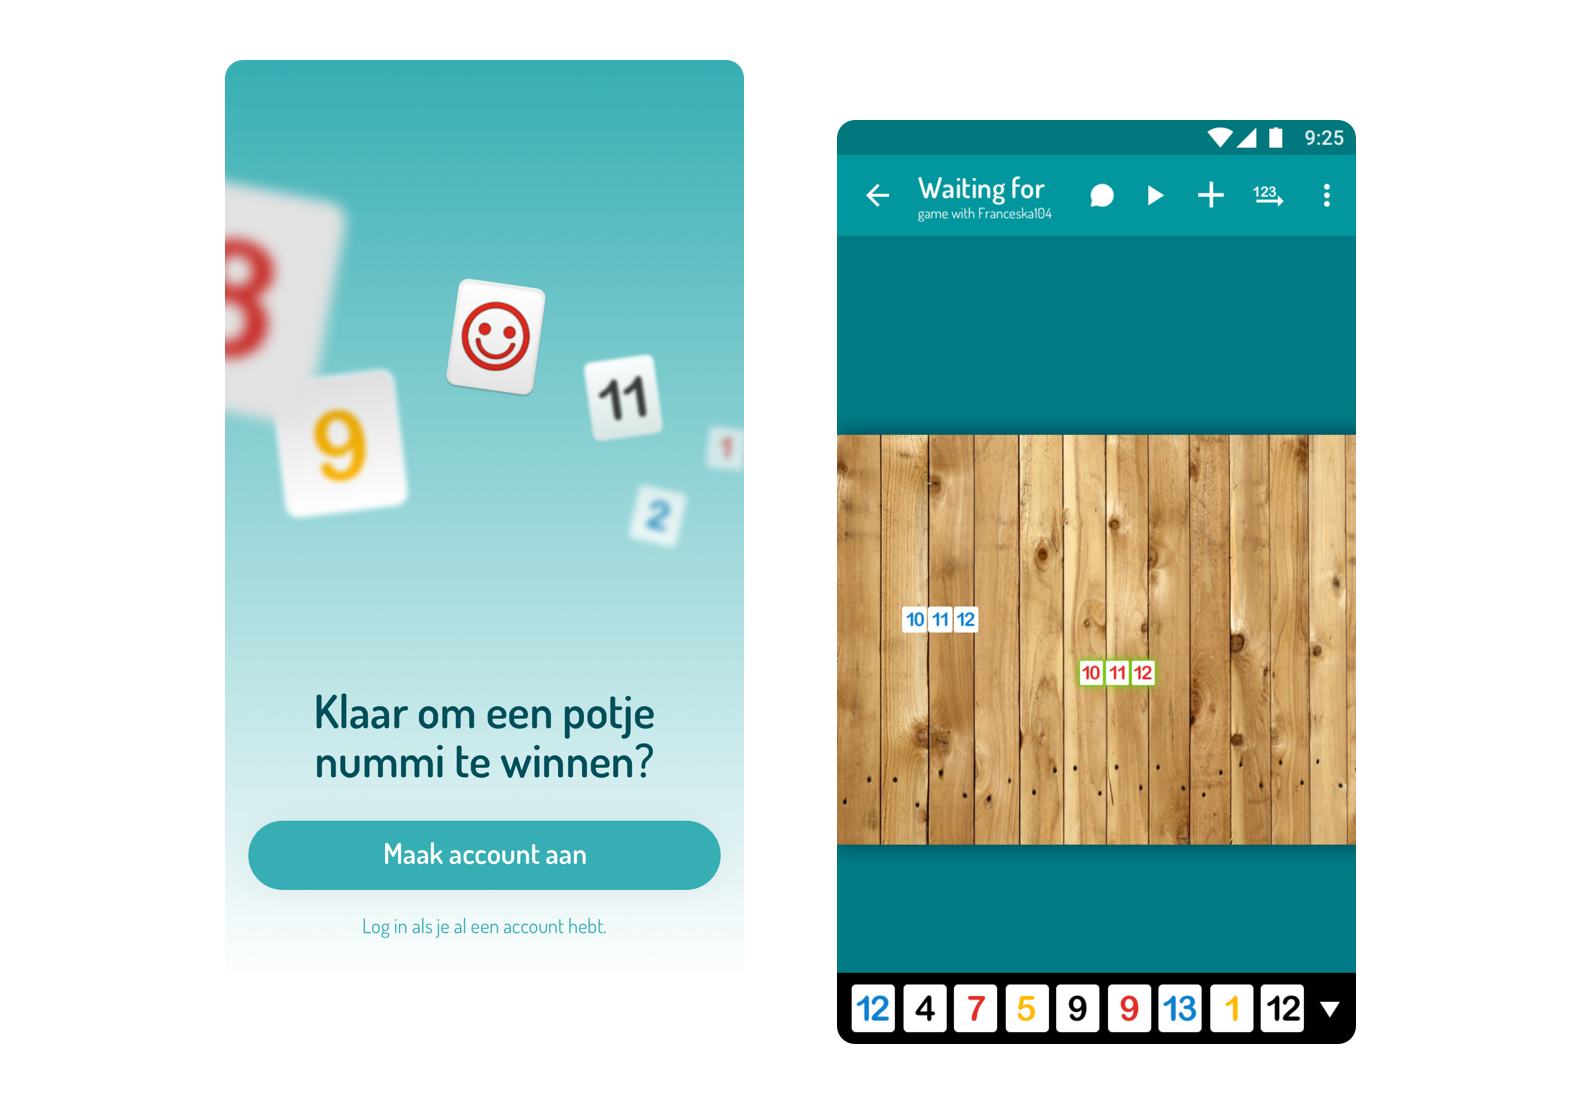 nummi is an app to play an old-fashioned game of Rummy online against your family and friends.